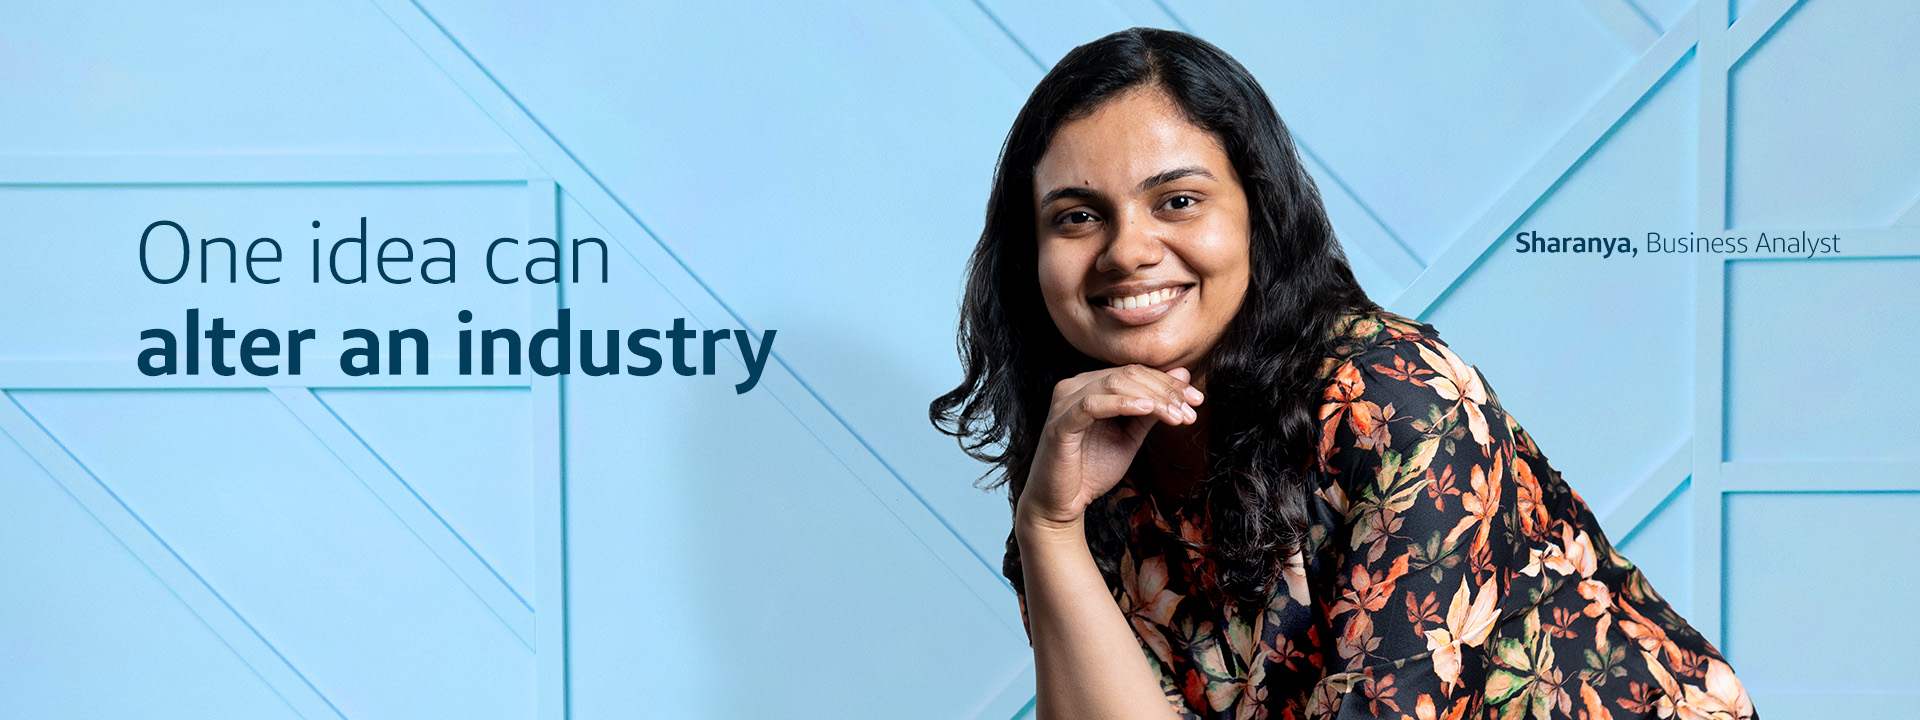 Capital One India associate Sharanya, Business Analyst, leans over and smiles in front of a light blue wall, next to the title "One idea can alter an industry"